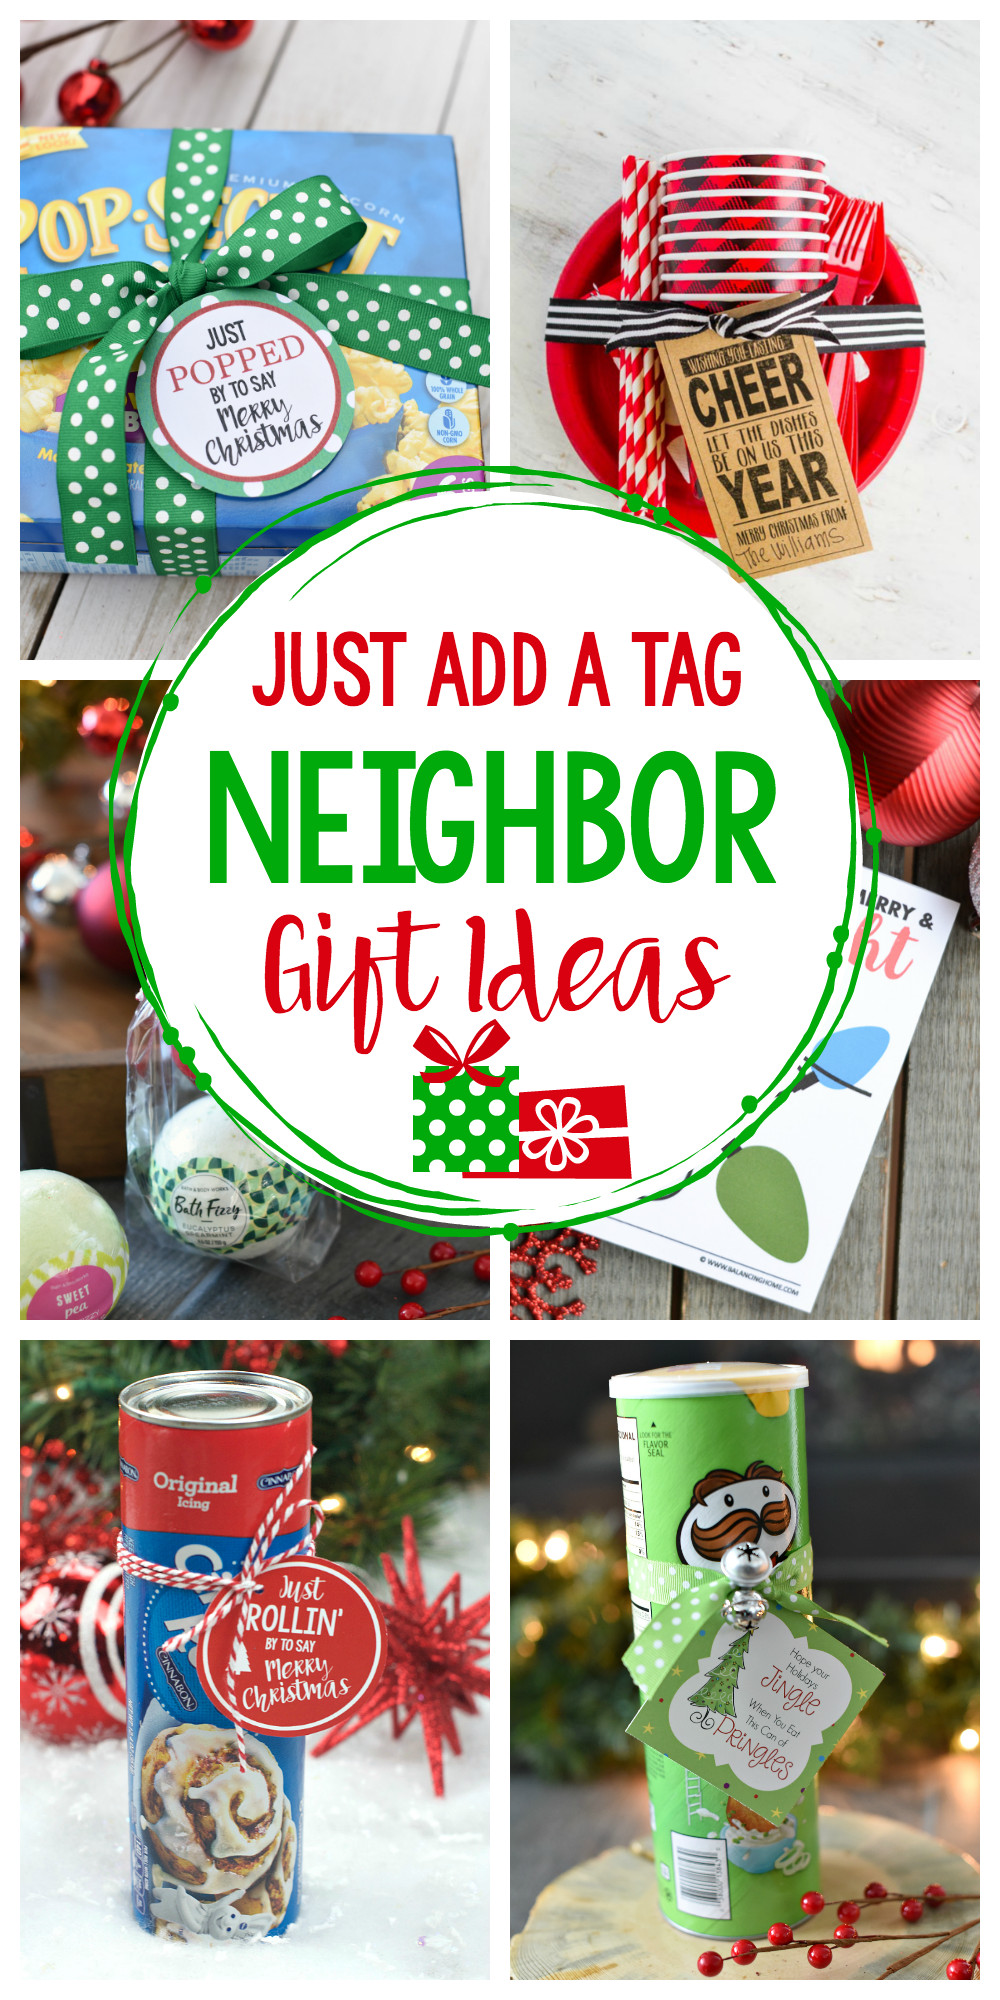 Fun Holiday Gift Ideas
 25 Easy Neighbor Gifts Just Add a Tag Crazy Little Projects